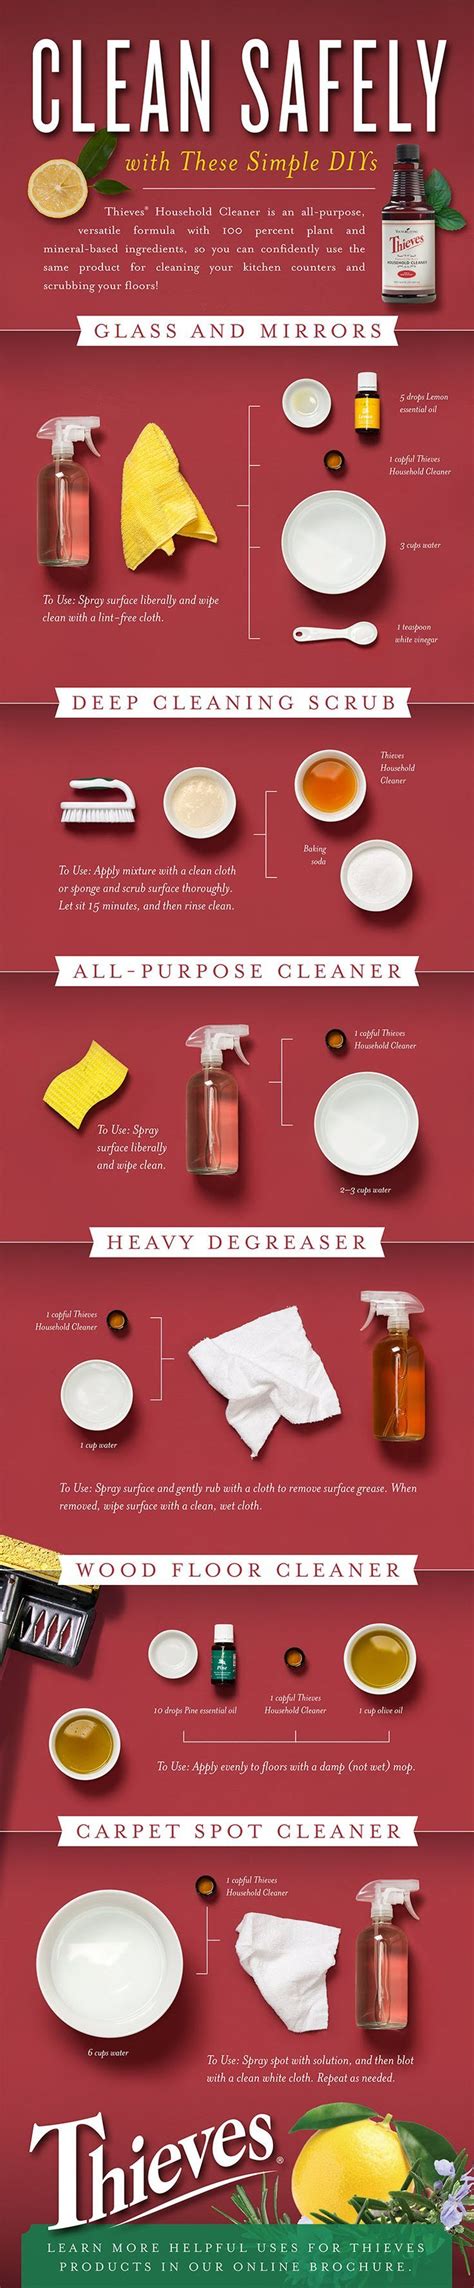 thieves essential oil recipes essential oils cleaning young living